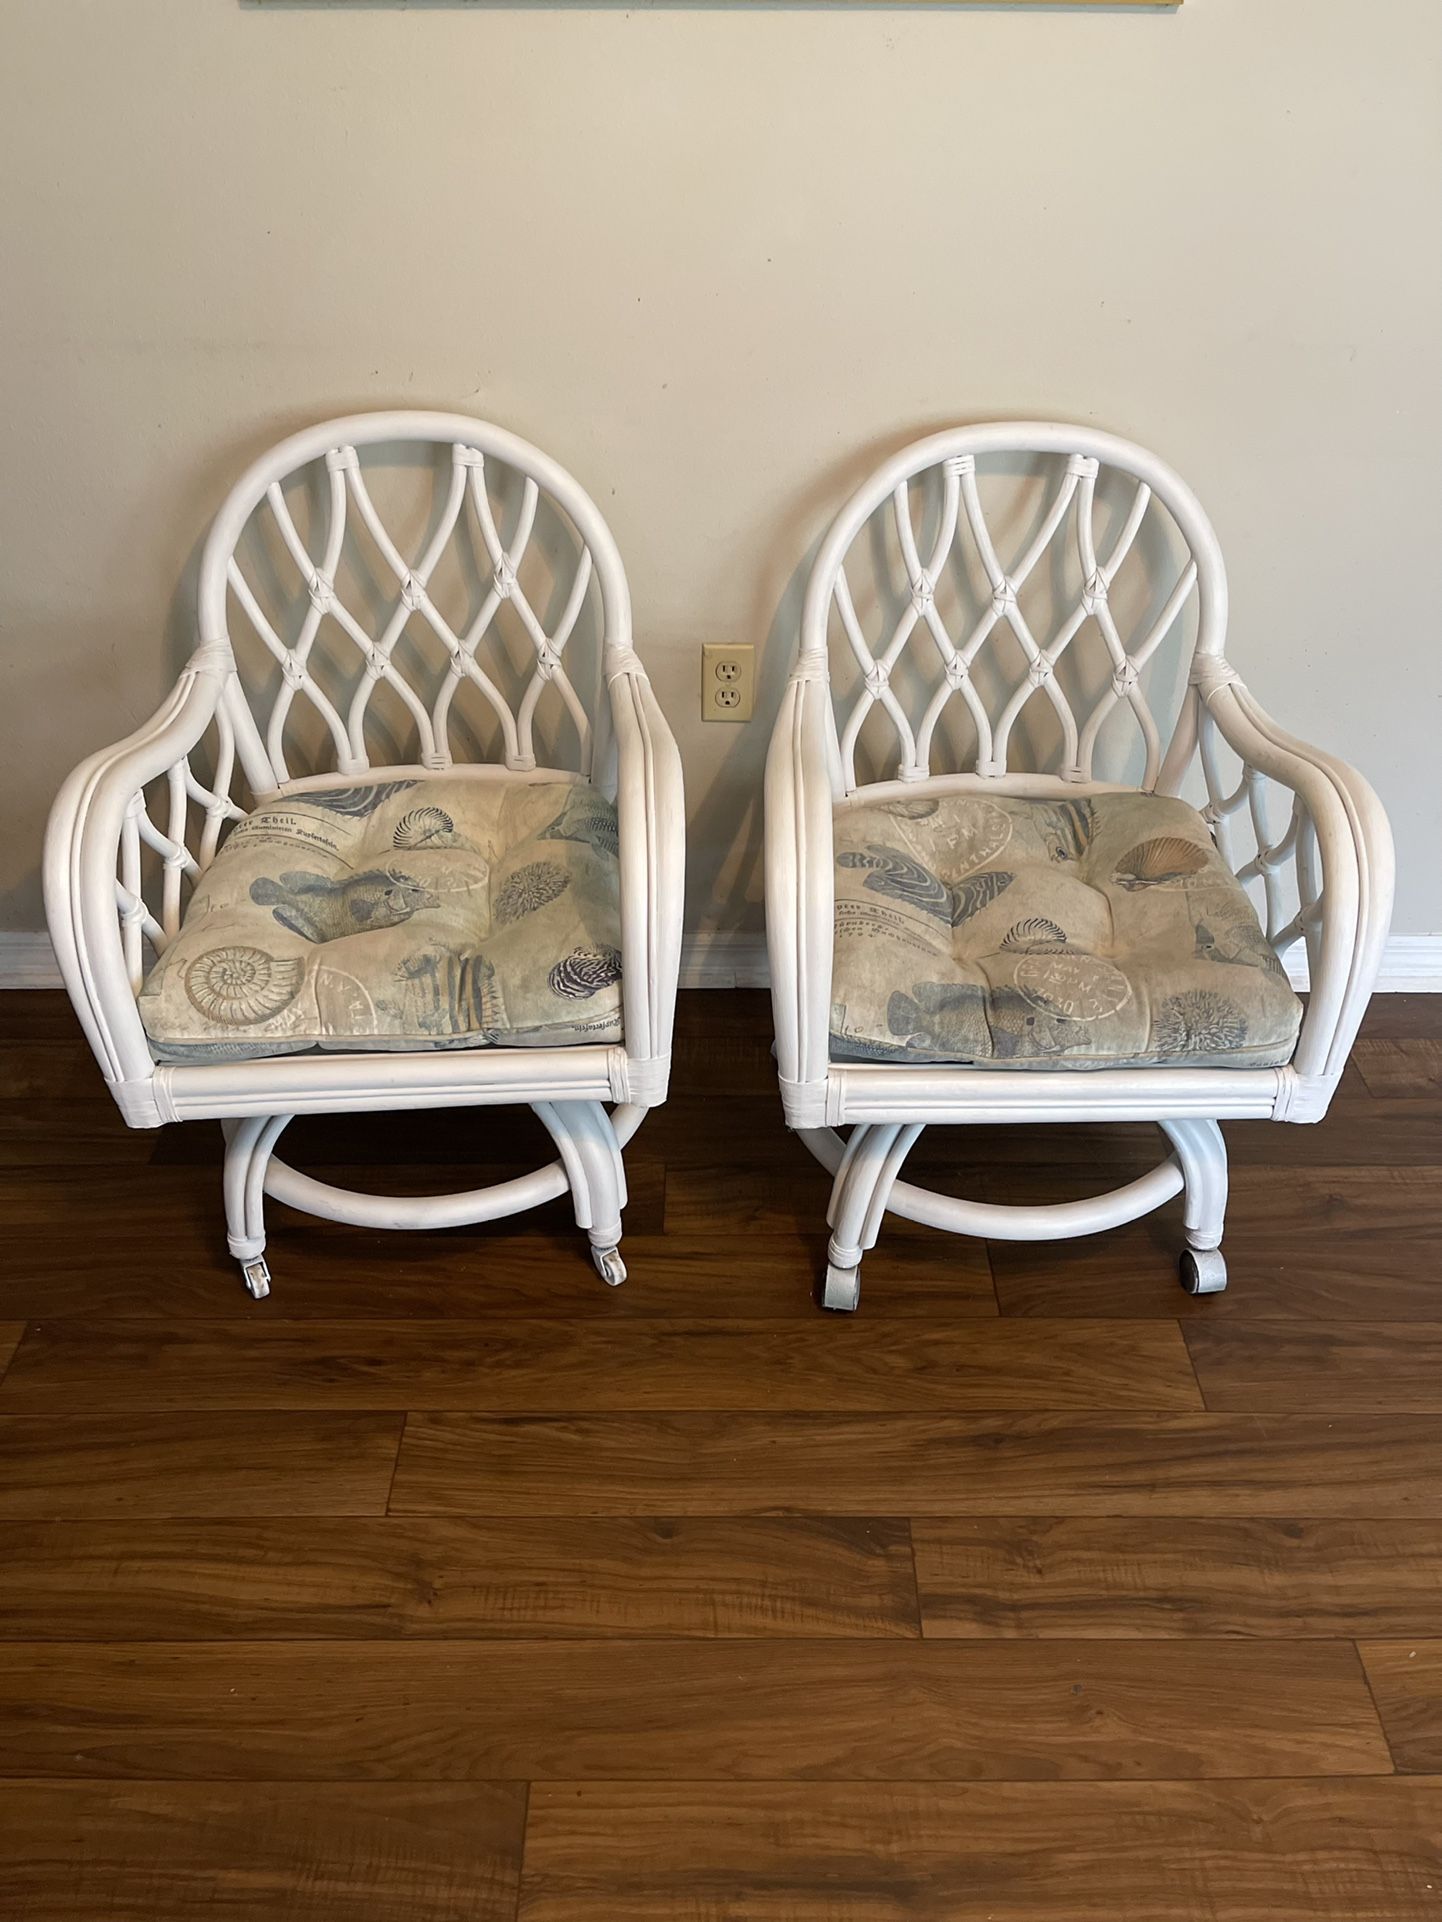 Two Bamboo Rattan Swivels Rocking Chairs With Wheels And Cushions- Great For Patio - $85 For Both - Delivery Available 